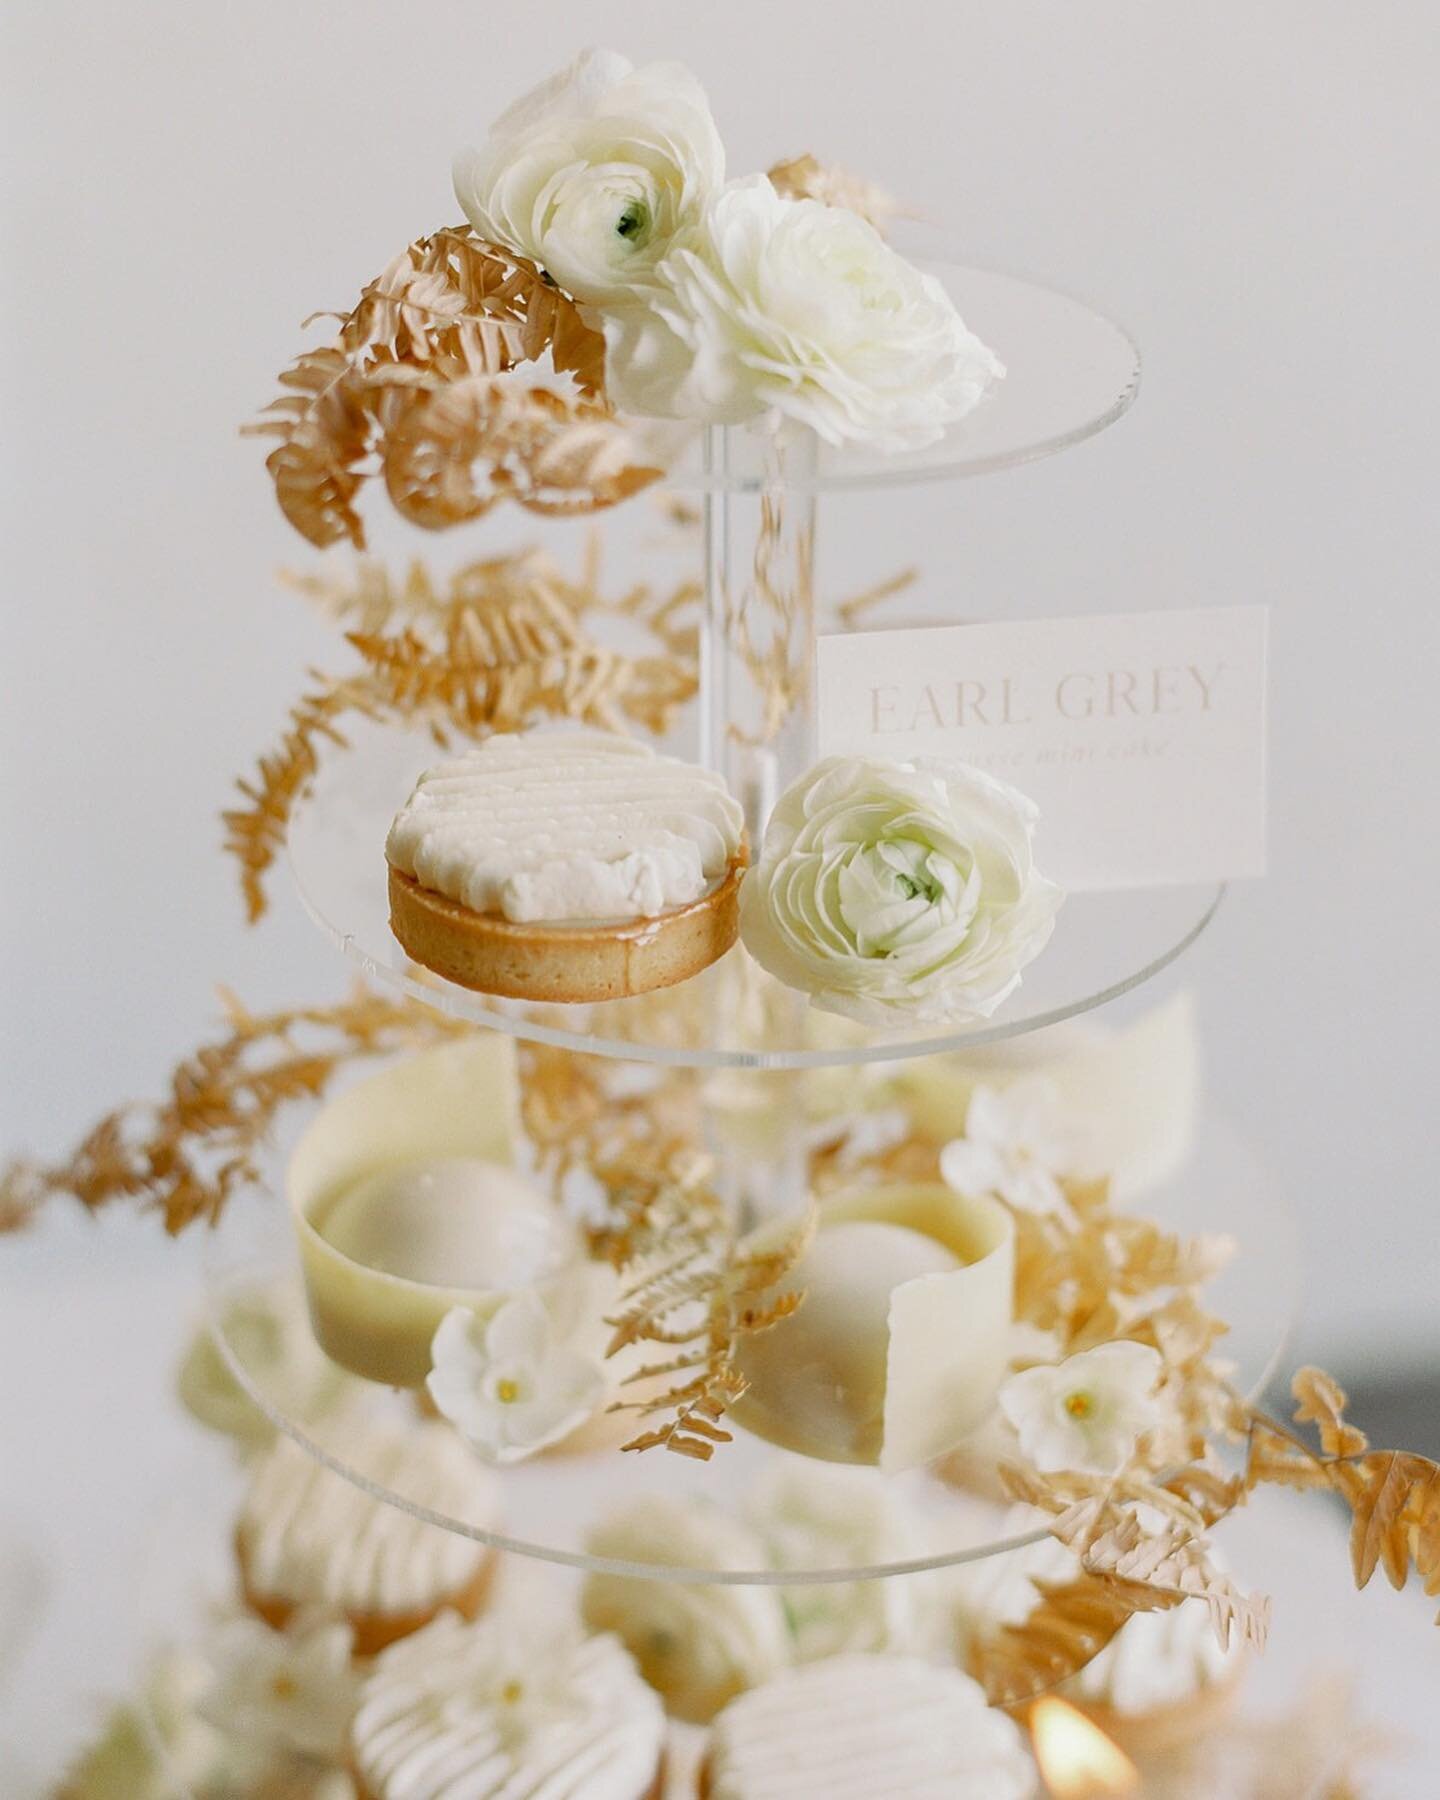 The overall color tone of this shoot is toward more earthy and neutral, thus I tried to stay away bright colors when considering the choice of desserts. I love including fun options such as these two. They are my recent favorite French pastries! ⁠
+V